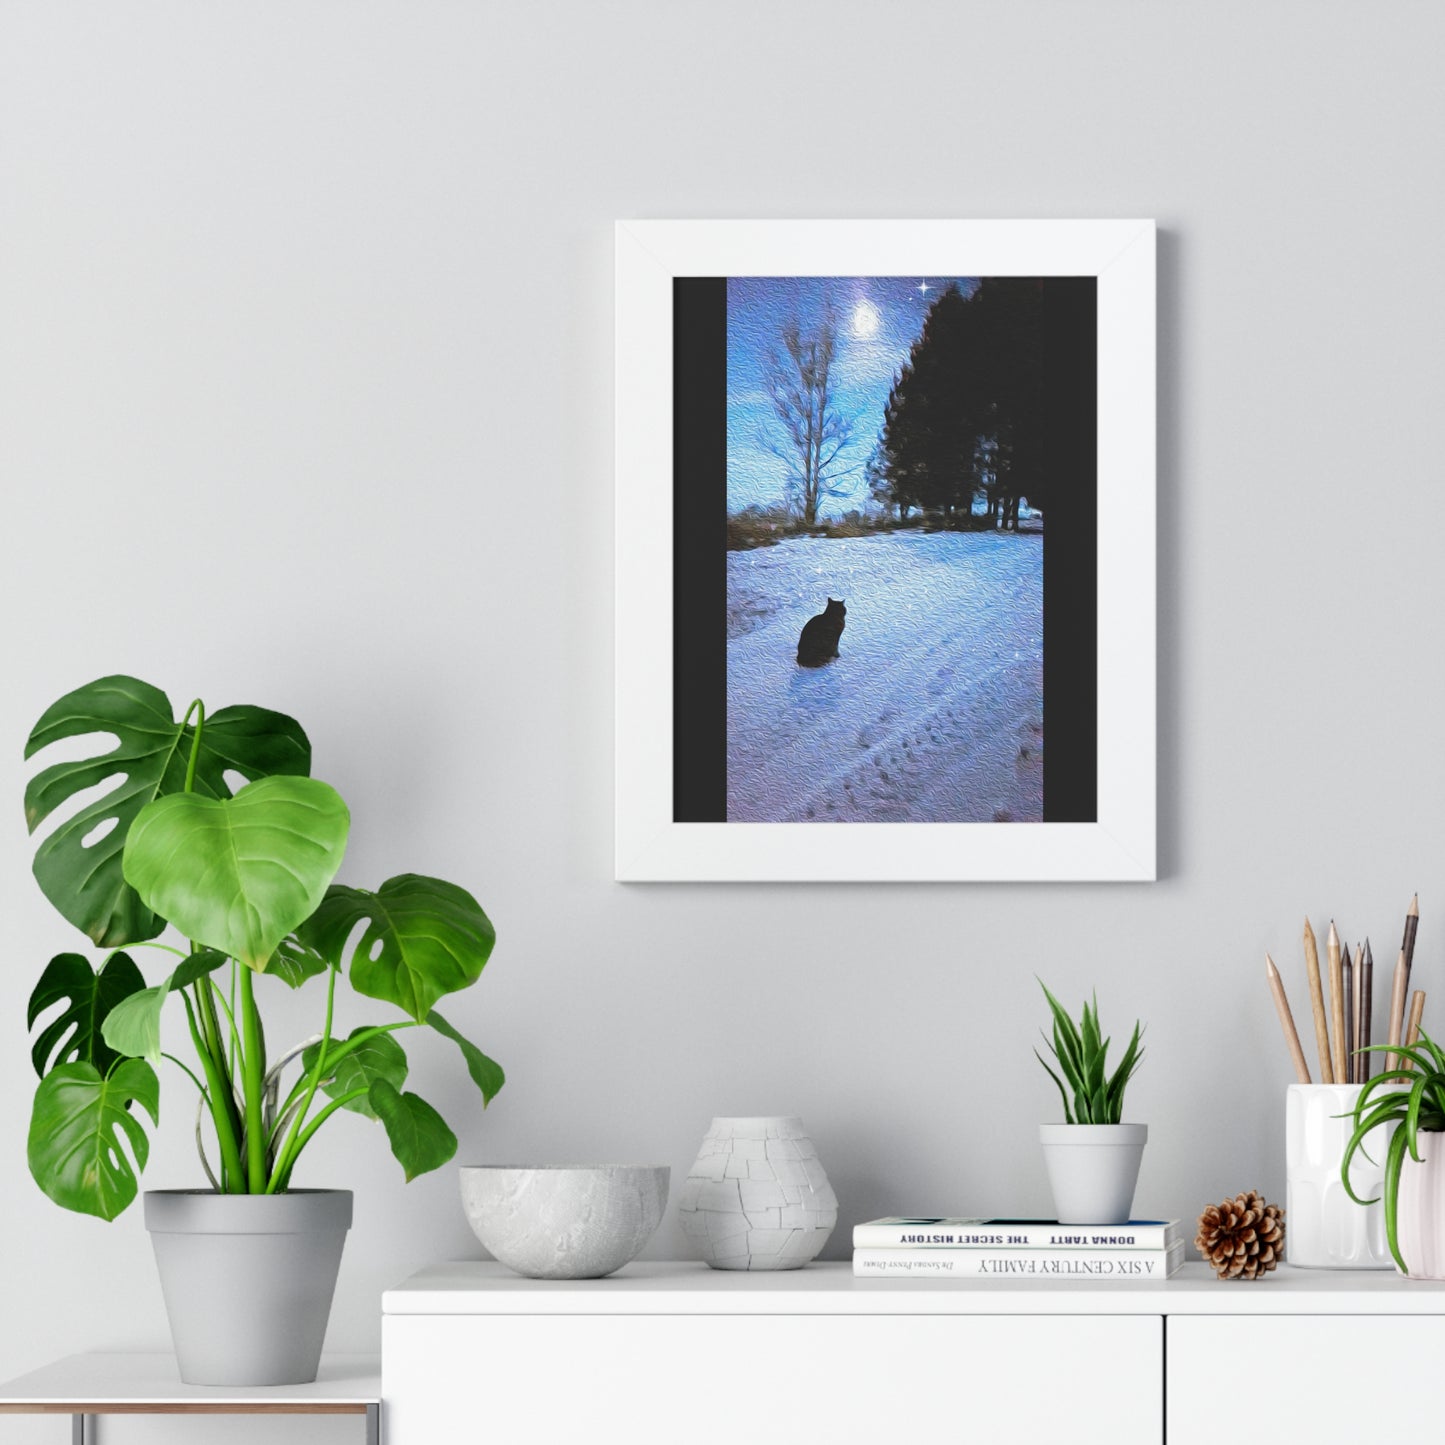 Under A Tabby Moon-Cat In Snow Framed Vertical Photo Art Print/Poster